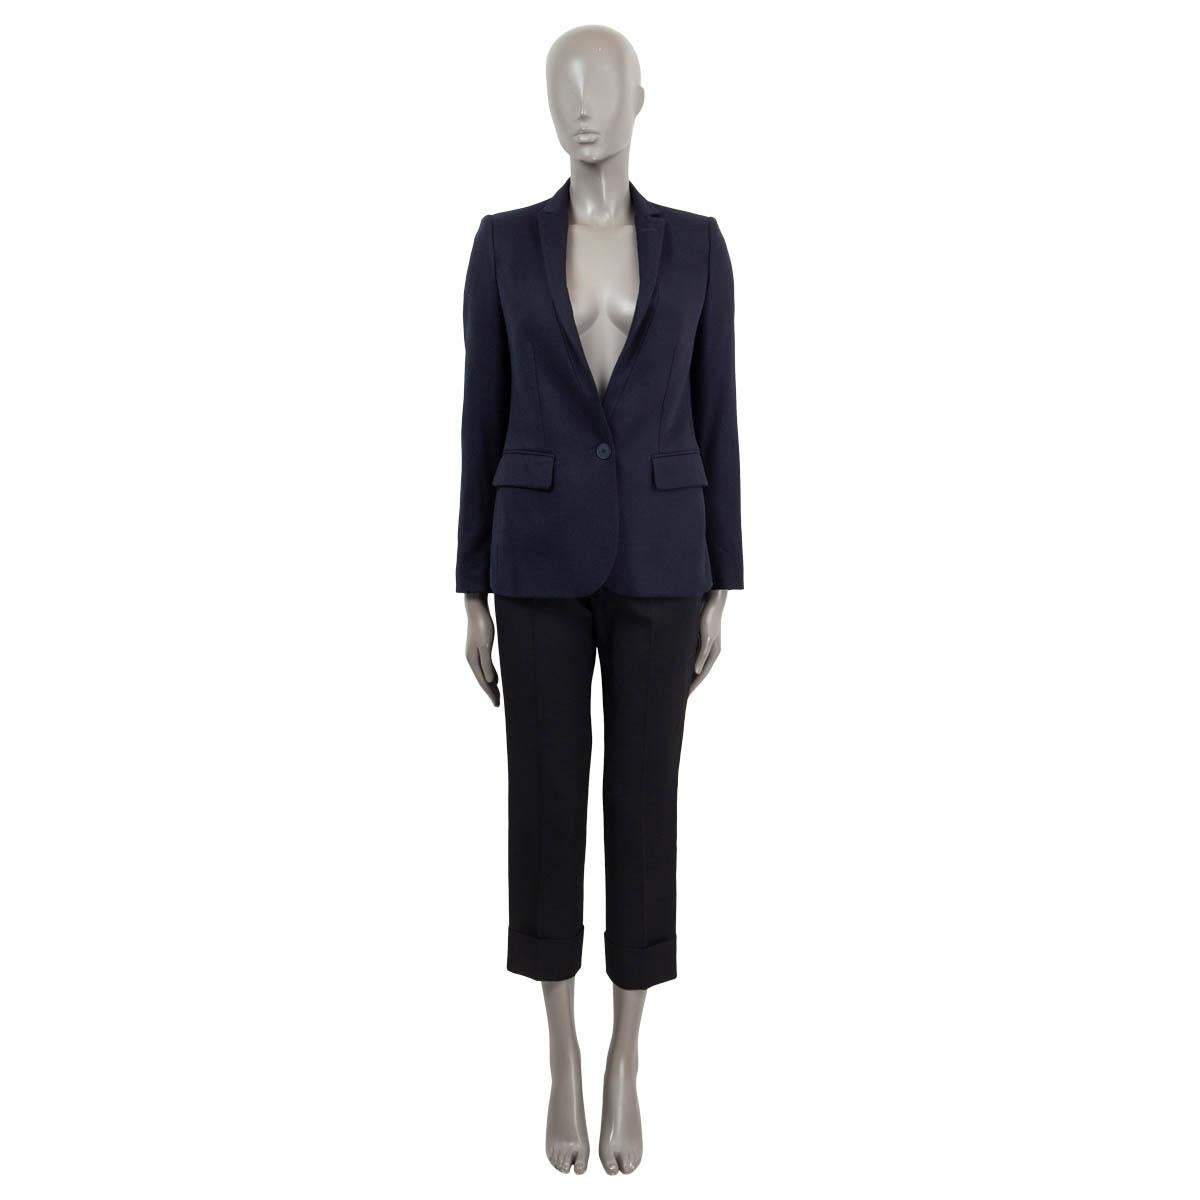 100% authentic Stella McCartney single button blazer in navy wool (100%), rayon (52%) and cotton (48%) with notch collar. Closes with single button and has flap pockets. Lined in navy rayon (100%). Has been worn and is in excellent